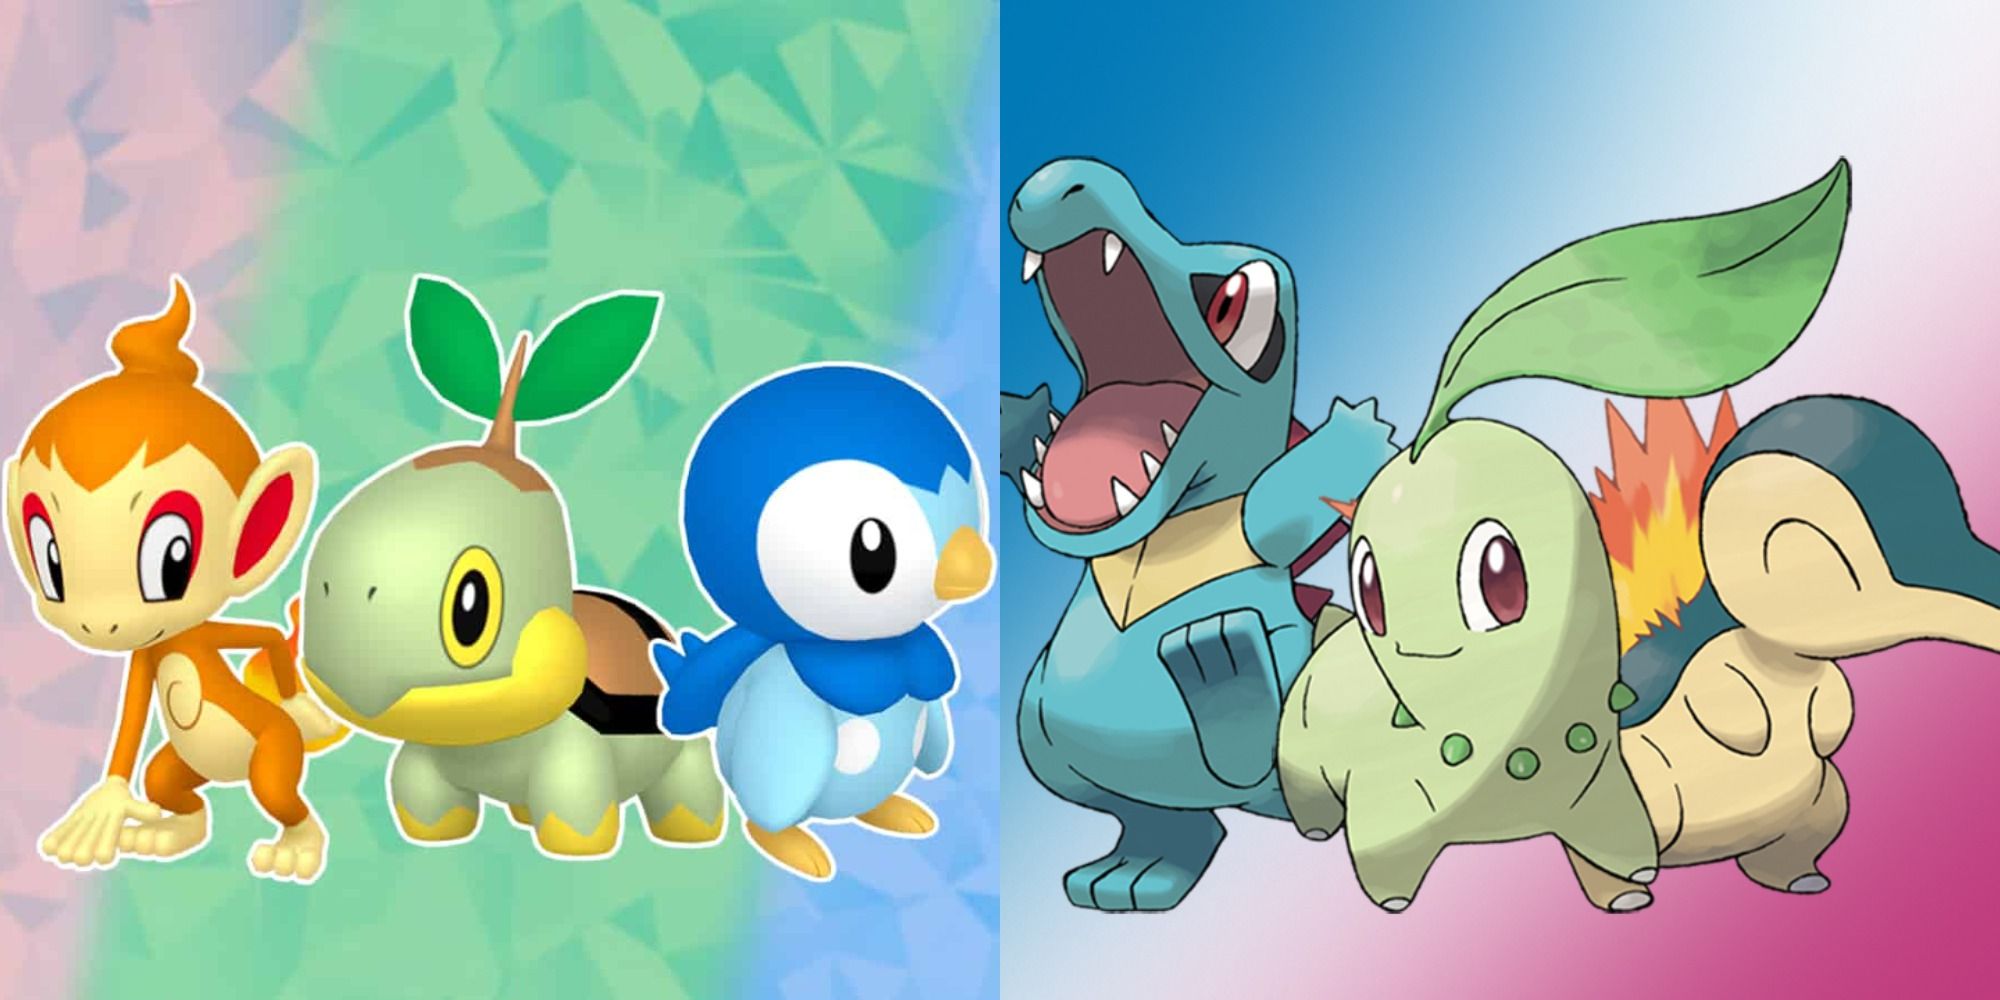 Split image showing the Sinnoh and Johto Starters from Pokémon